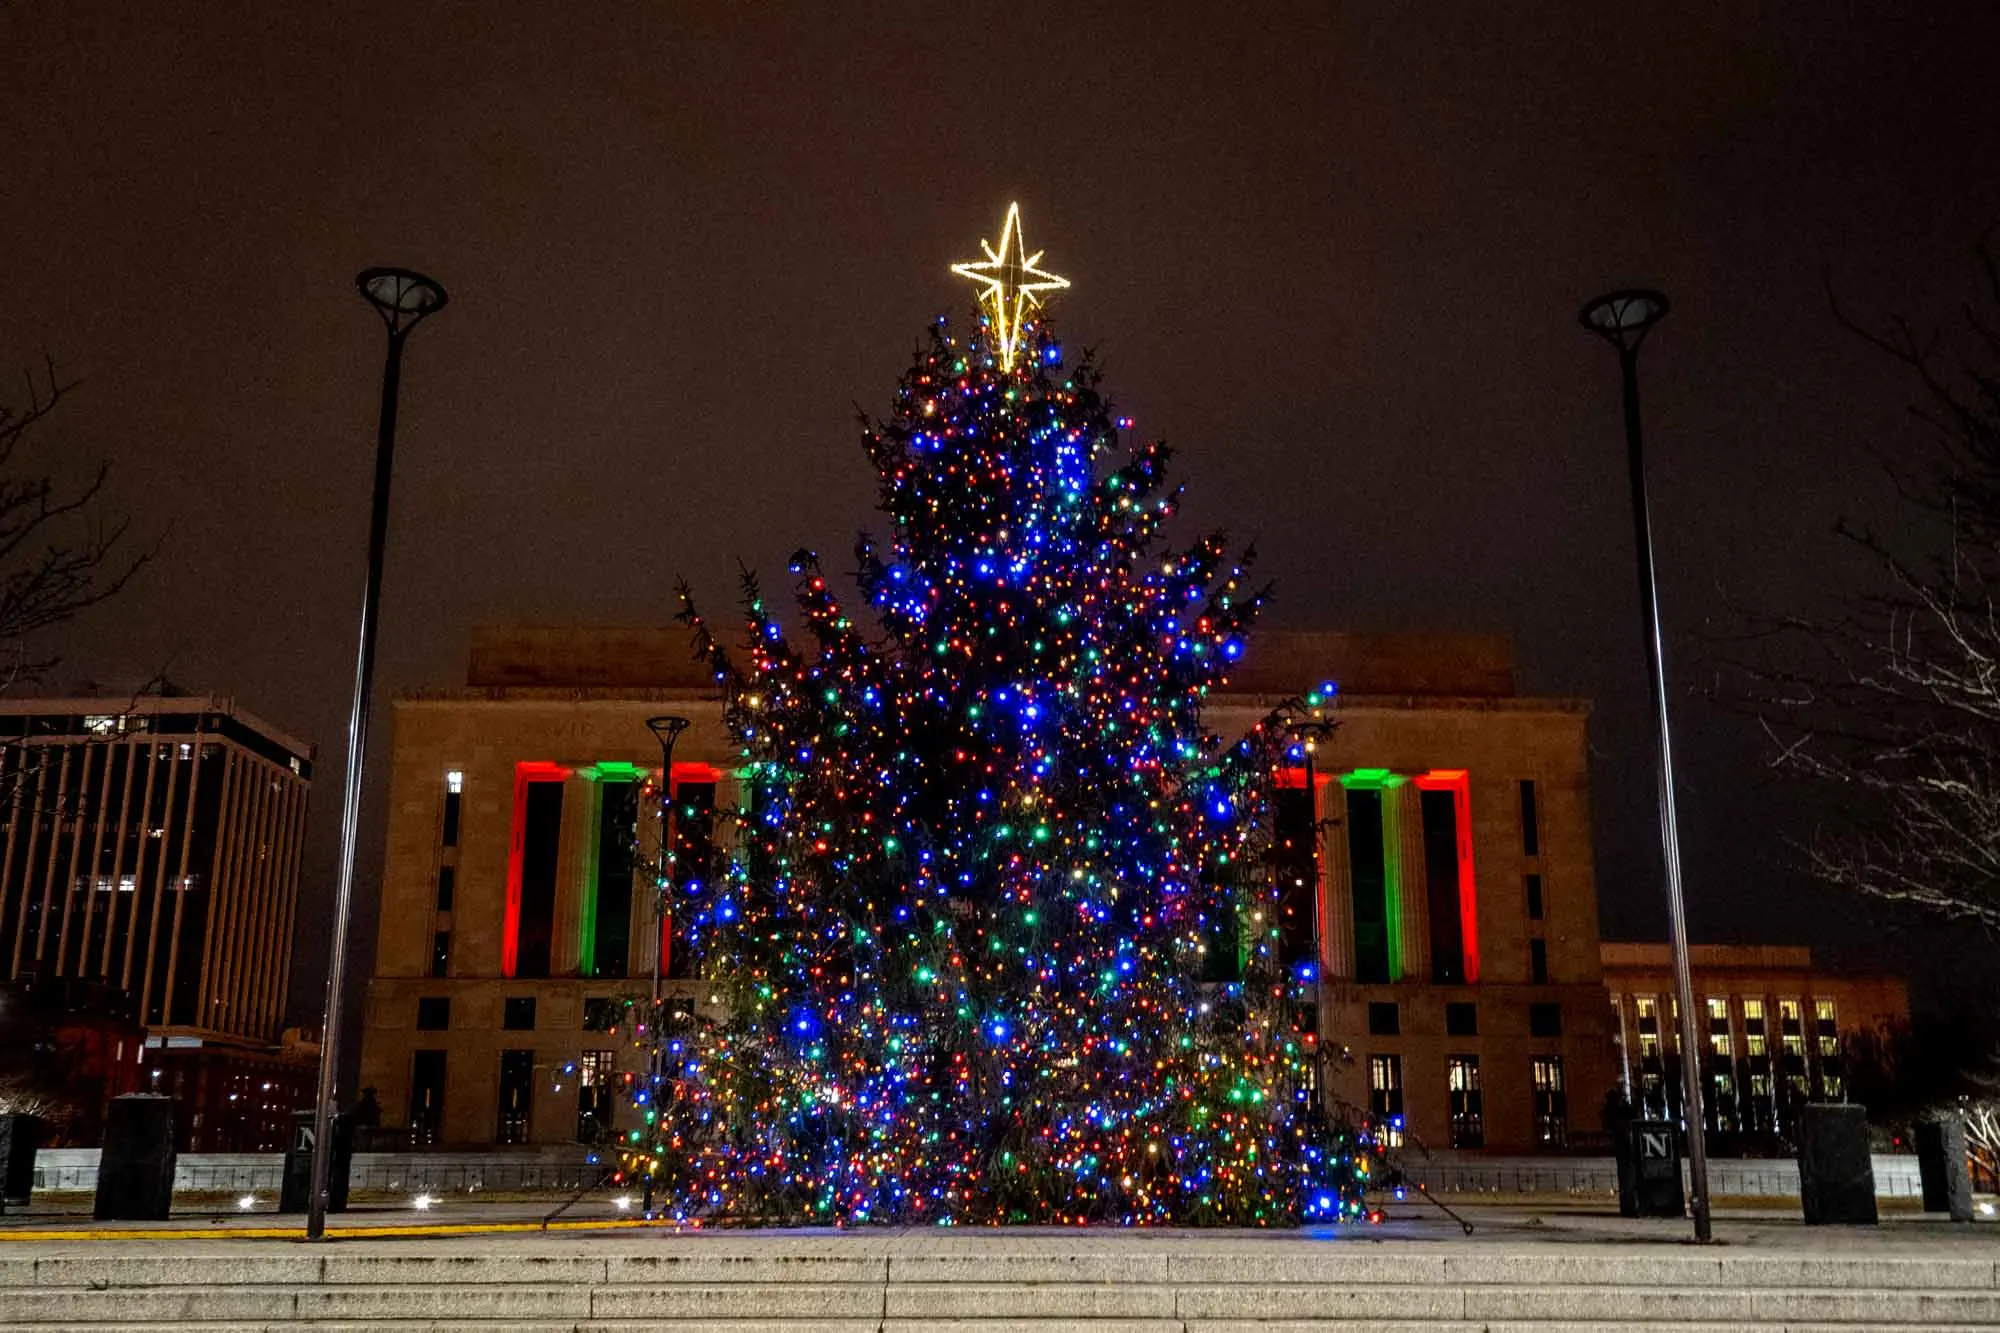 35-foot-tall Christmas tree lit up at night in a city square.